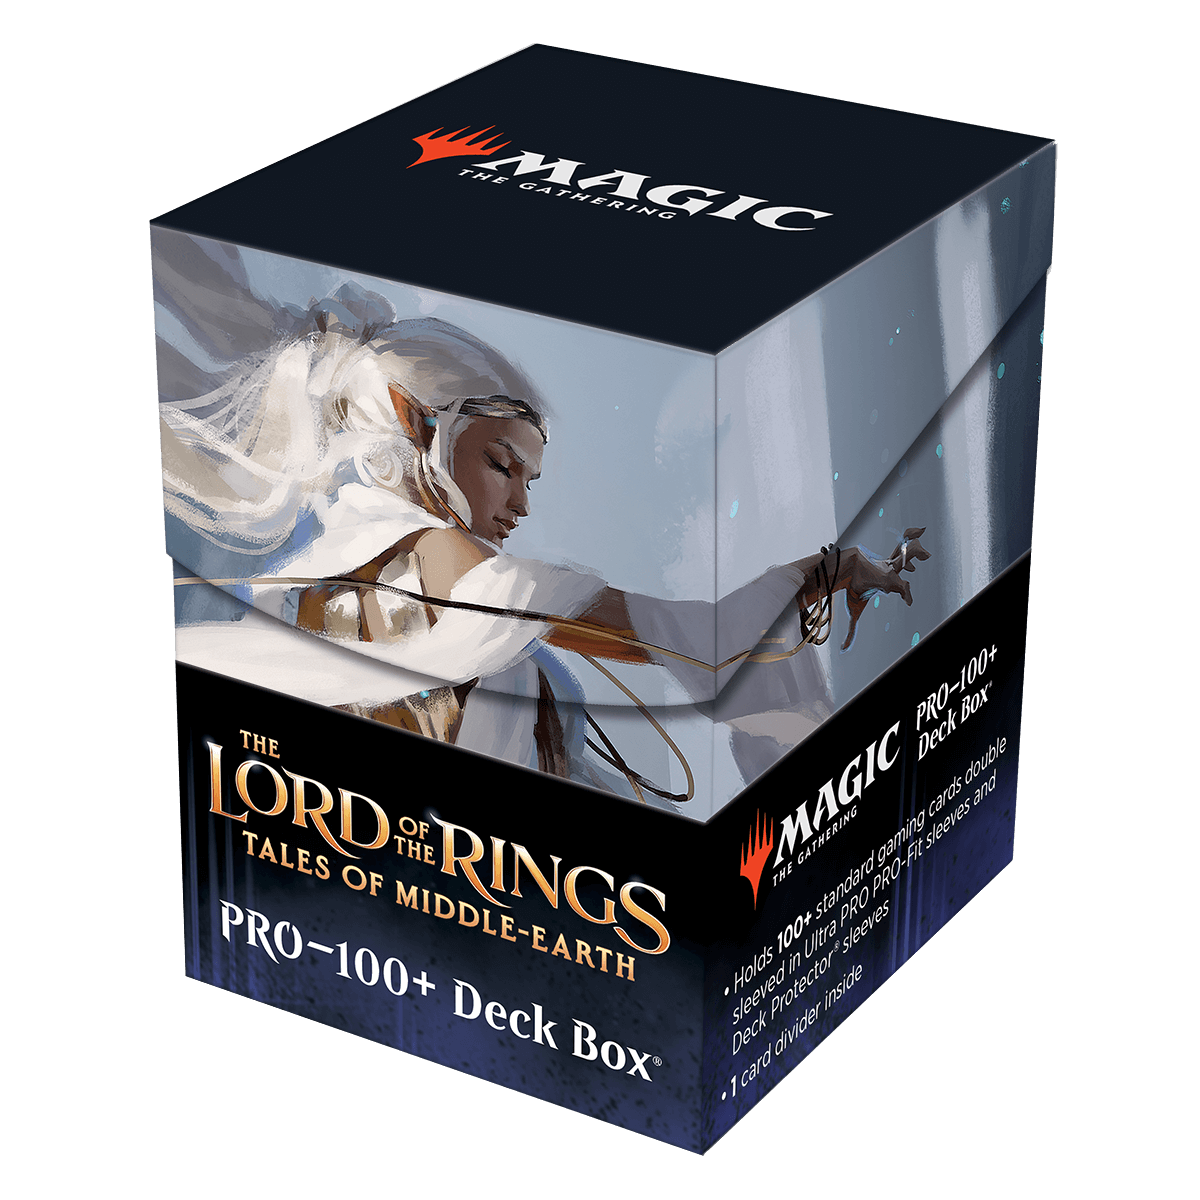 Ultra PRO: 100+ Deck Box - The Lord of the Rings (Galadriel)